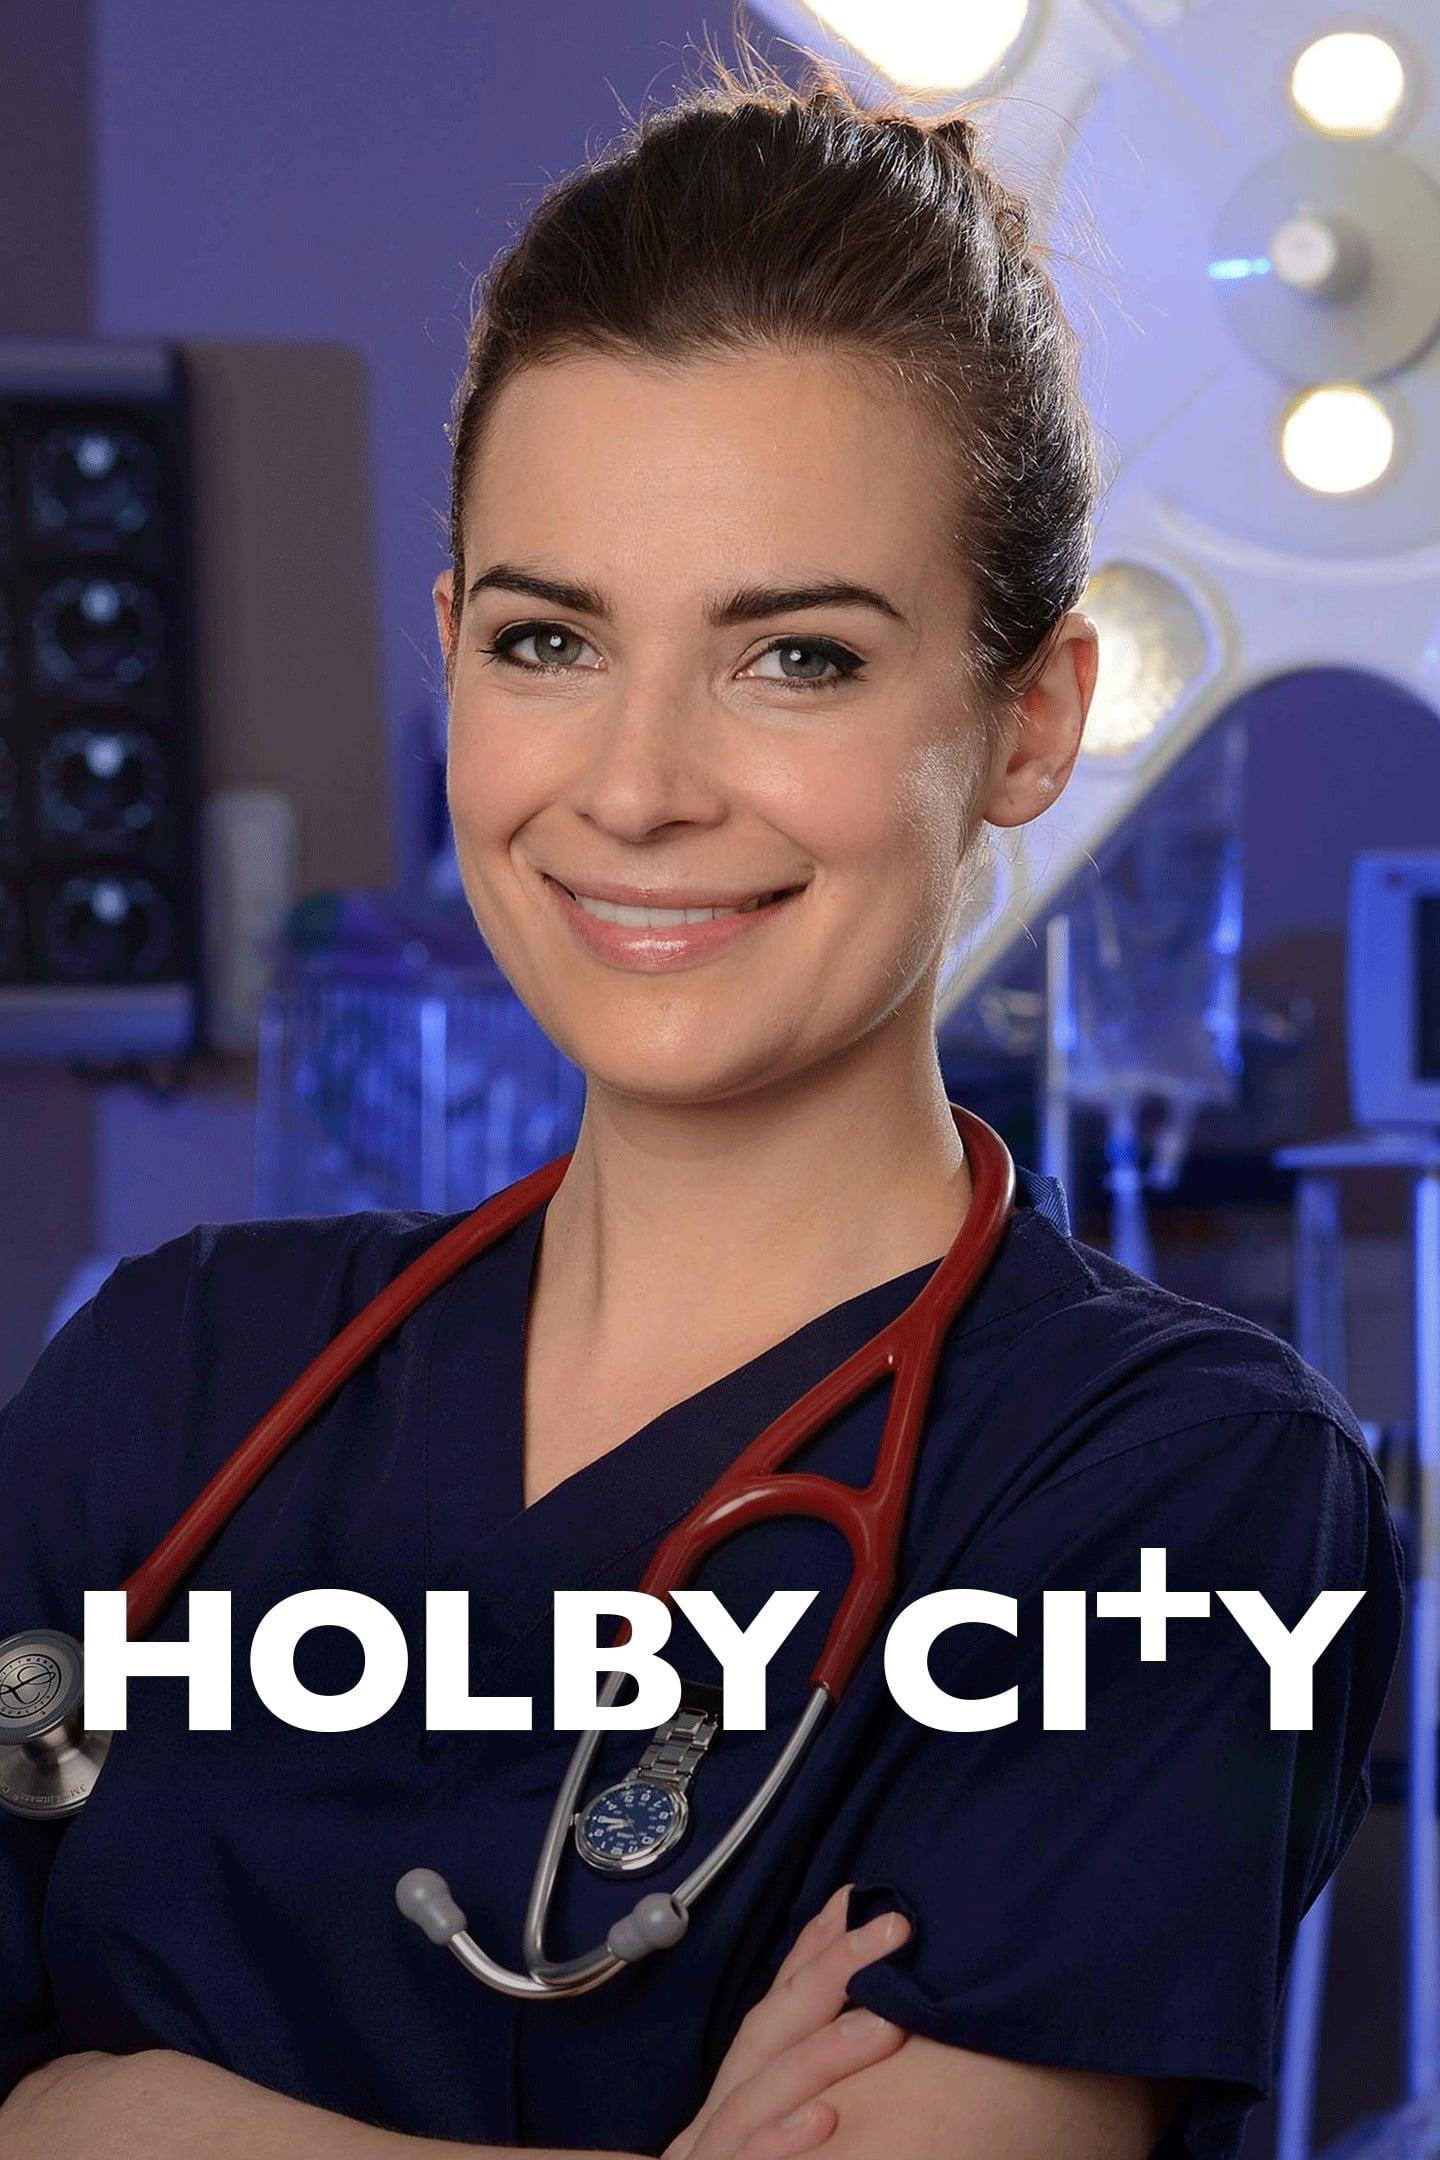 Holby City poster